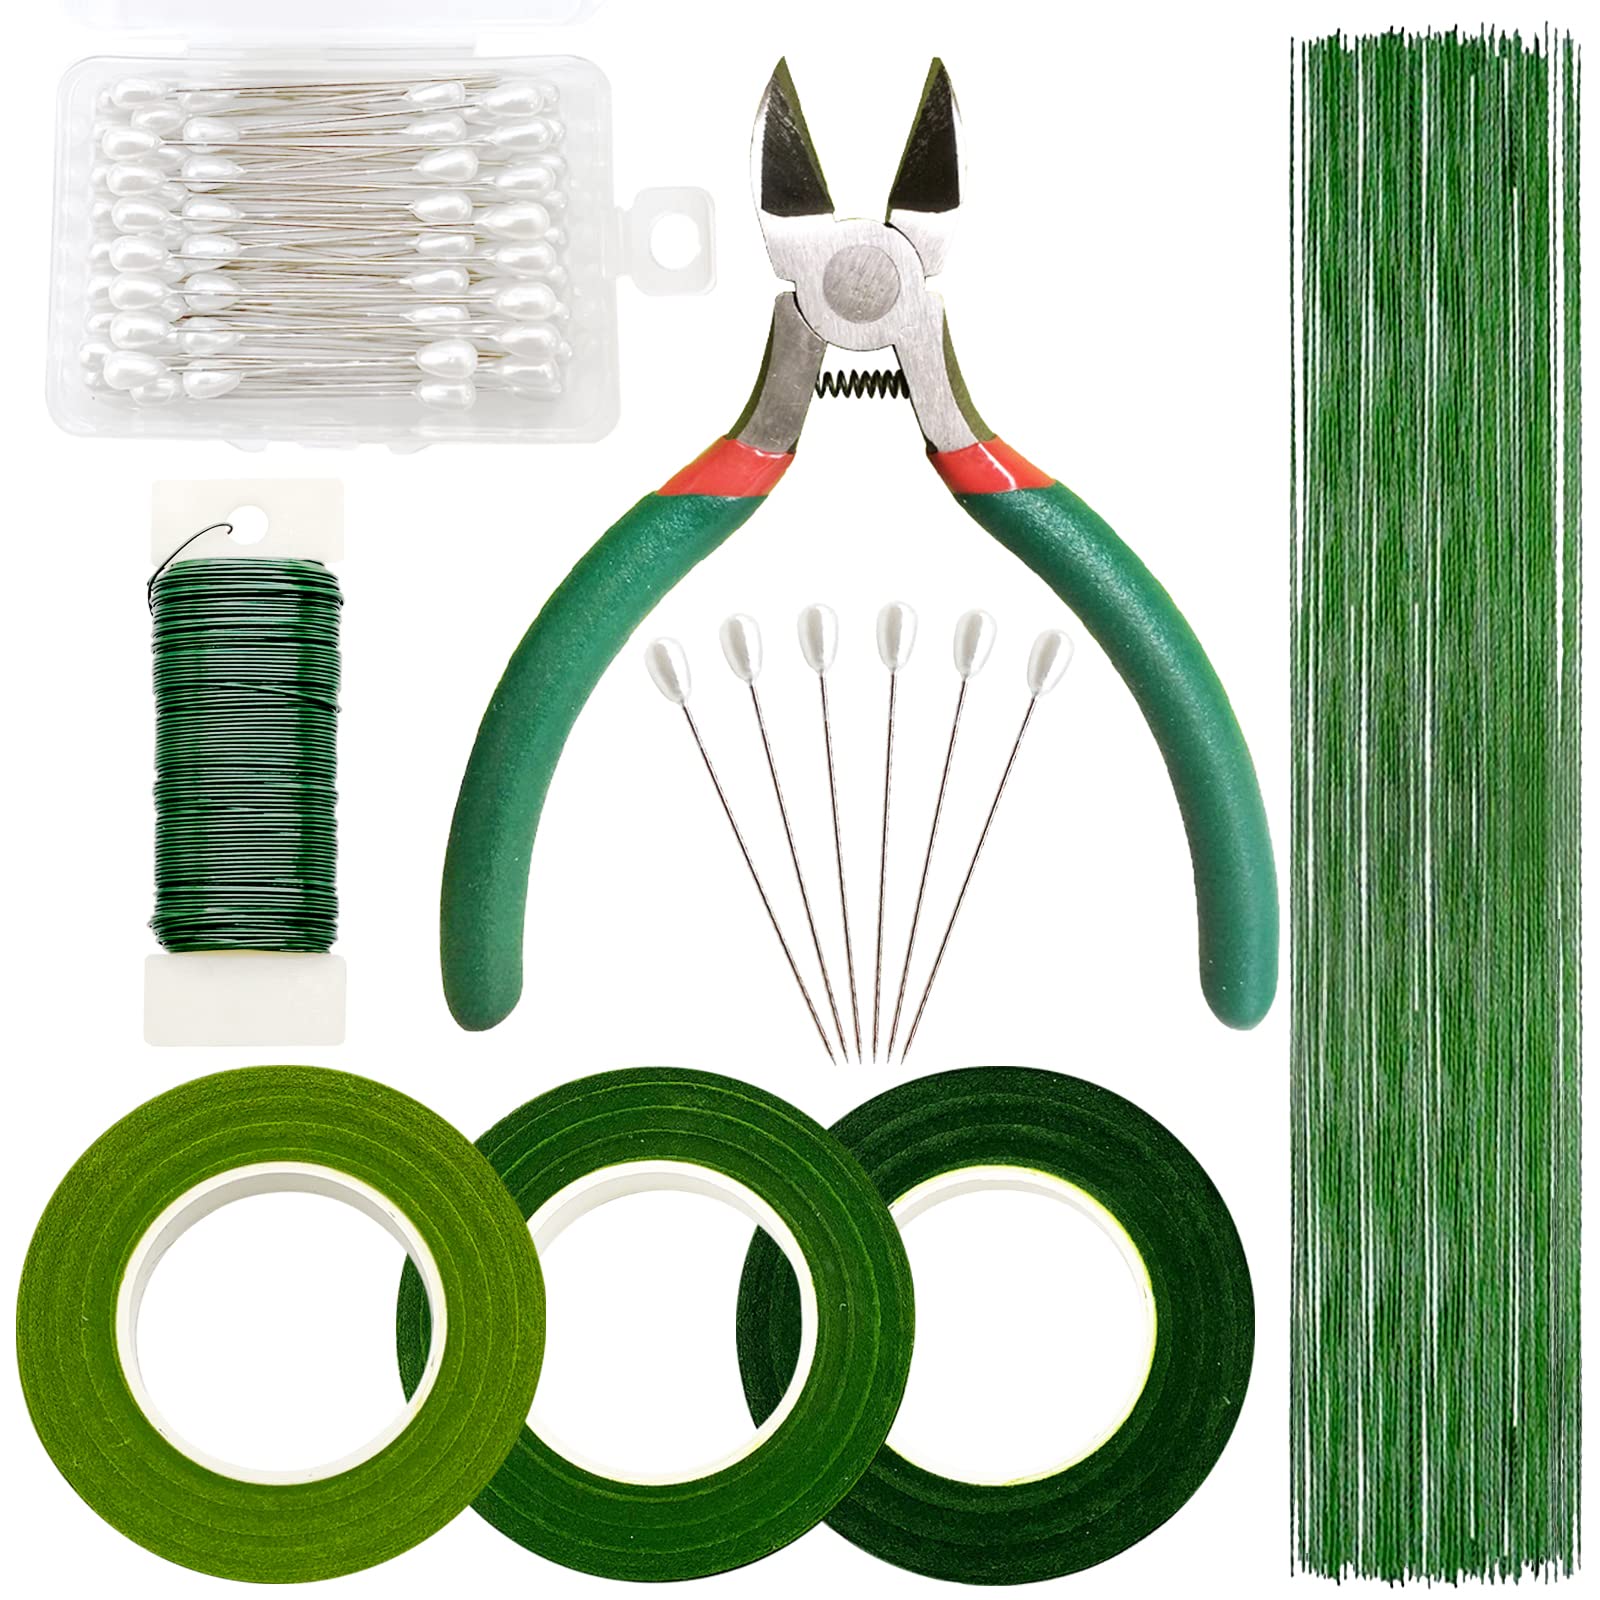 Paxcoo Floral Stem Arrangement Tools Kit with Wire Cutter Green Floral Tapes 26 Gauge Stem Wire and 22 Gauge Paddle Wire for Bouquet